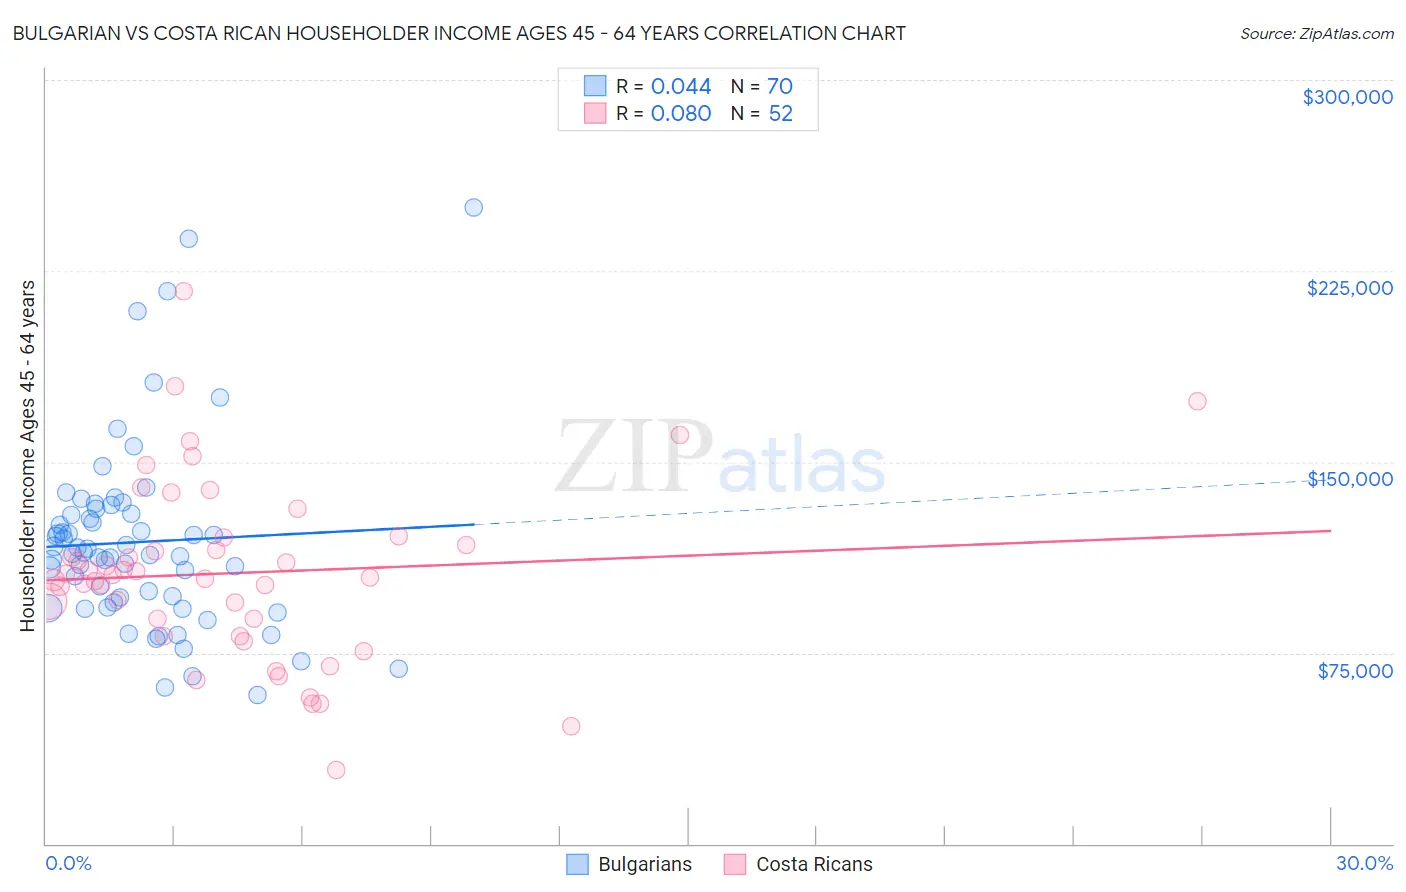 Bulgarian vs Costa Rican Householder Income Ages 45 - 64 years